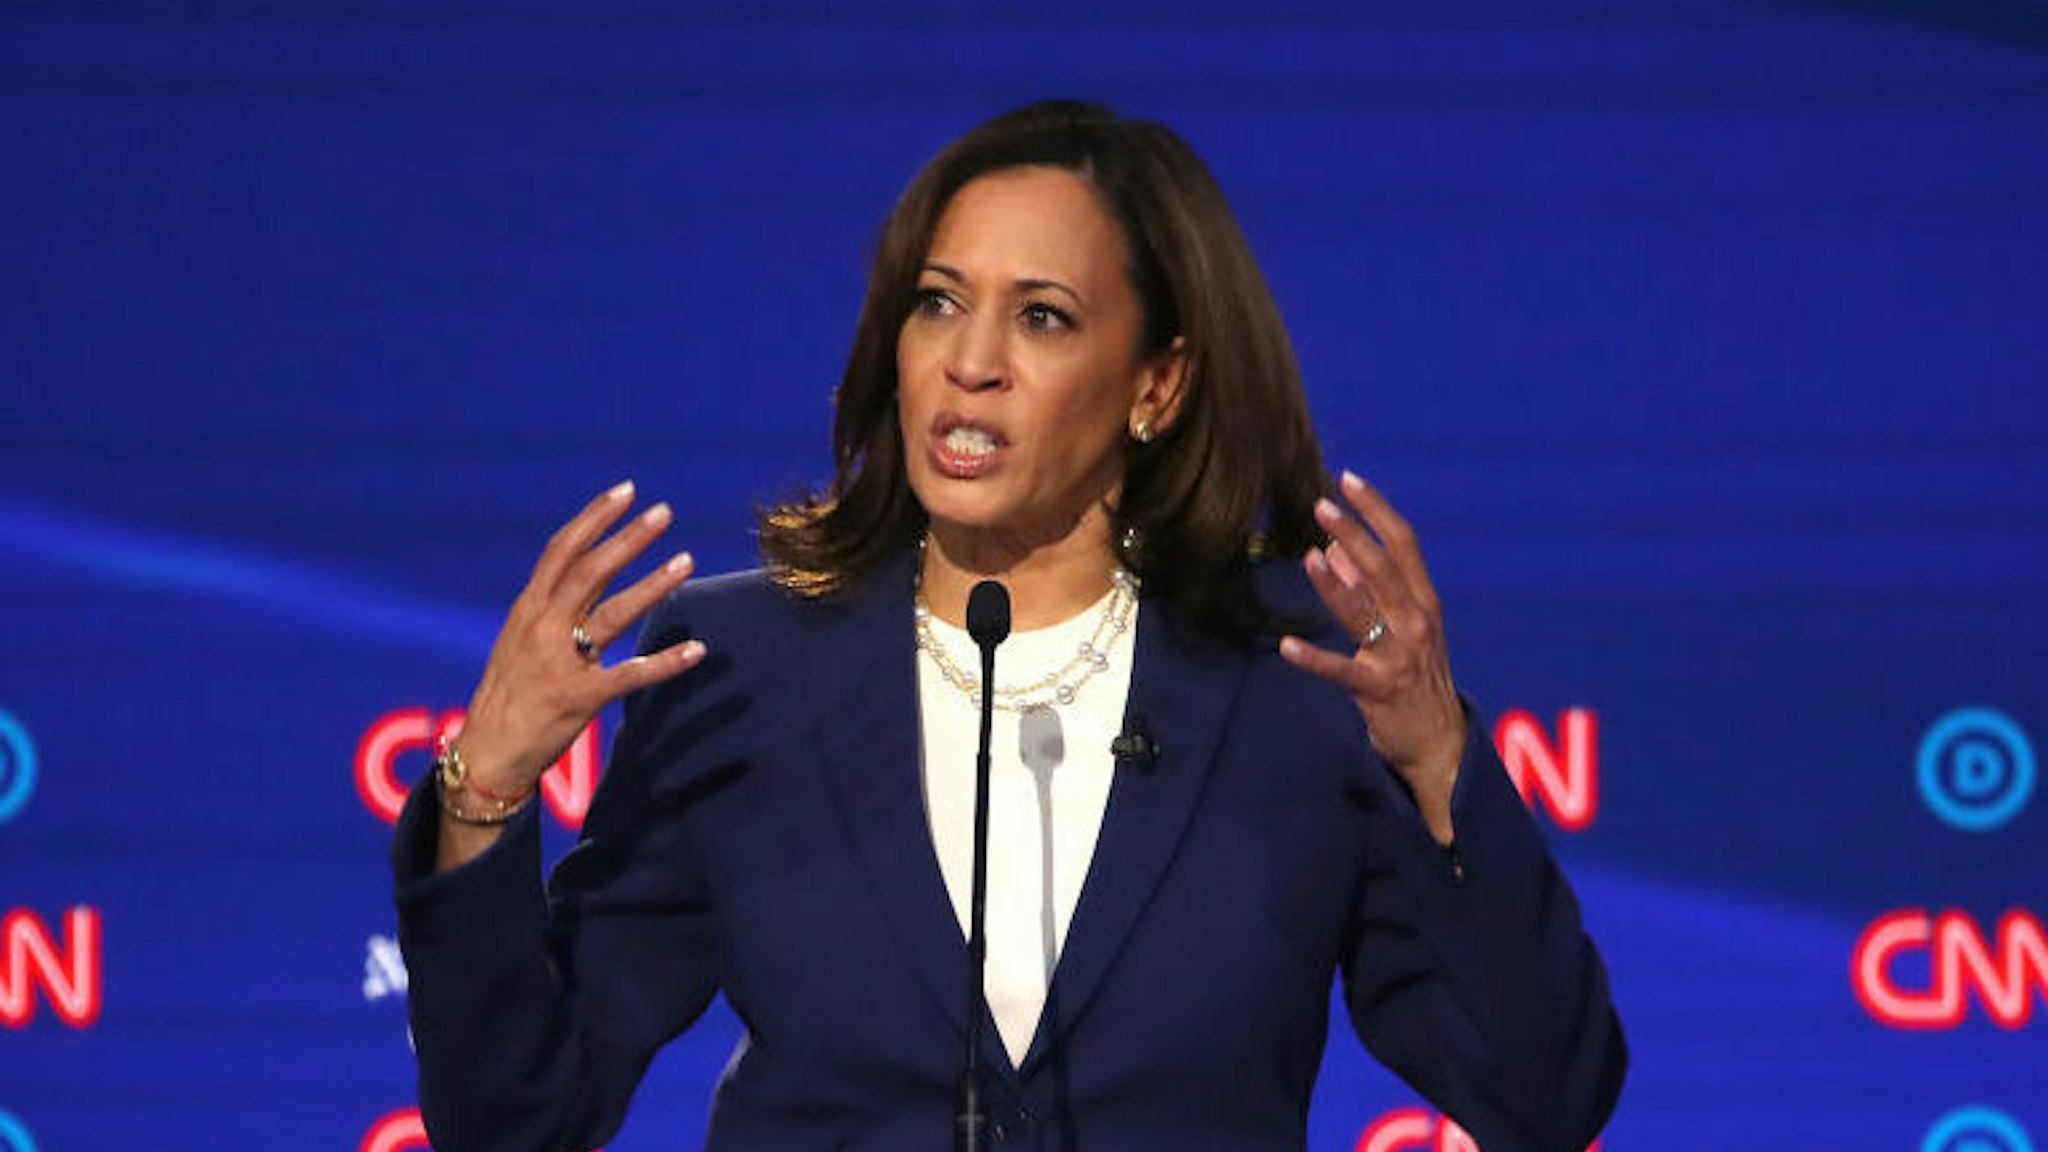 WESTERVILLE, OHIO - OCTOBER 15: Sen. Kamala Harris (D-CA) speaks during the Democratic Presidential Debate at Otterbein University on October 15, 2019 in Westerville, Ohio. A record 12 presidential hopefuls are participating in the debate hosted by CNN and The New York Times.